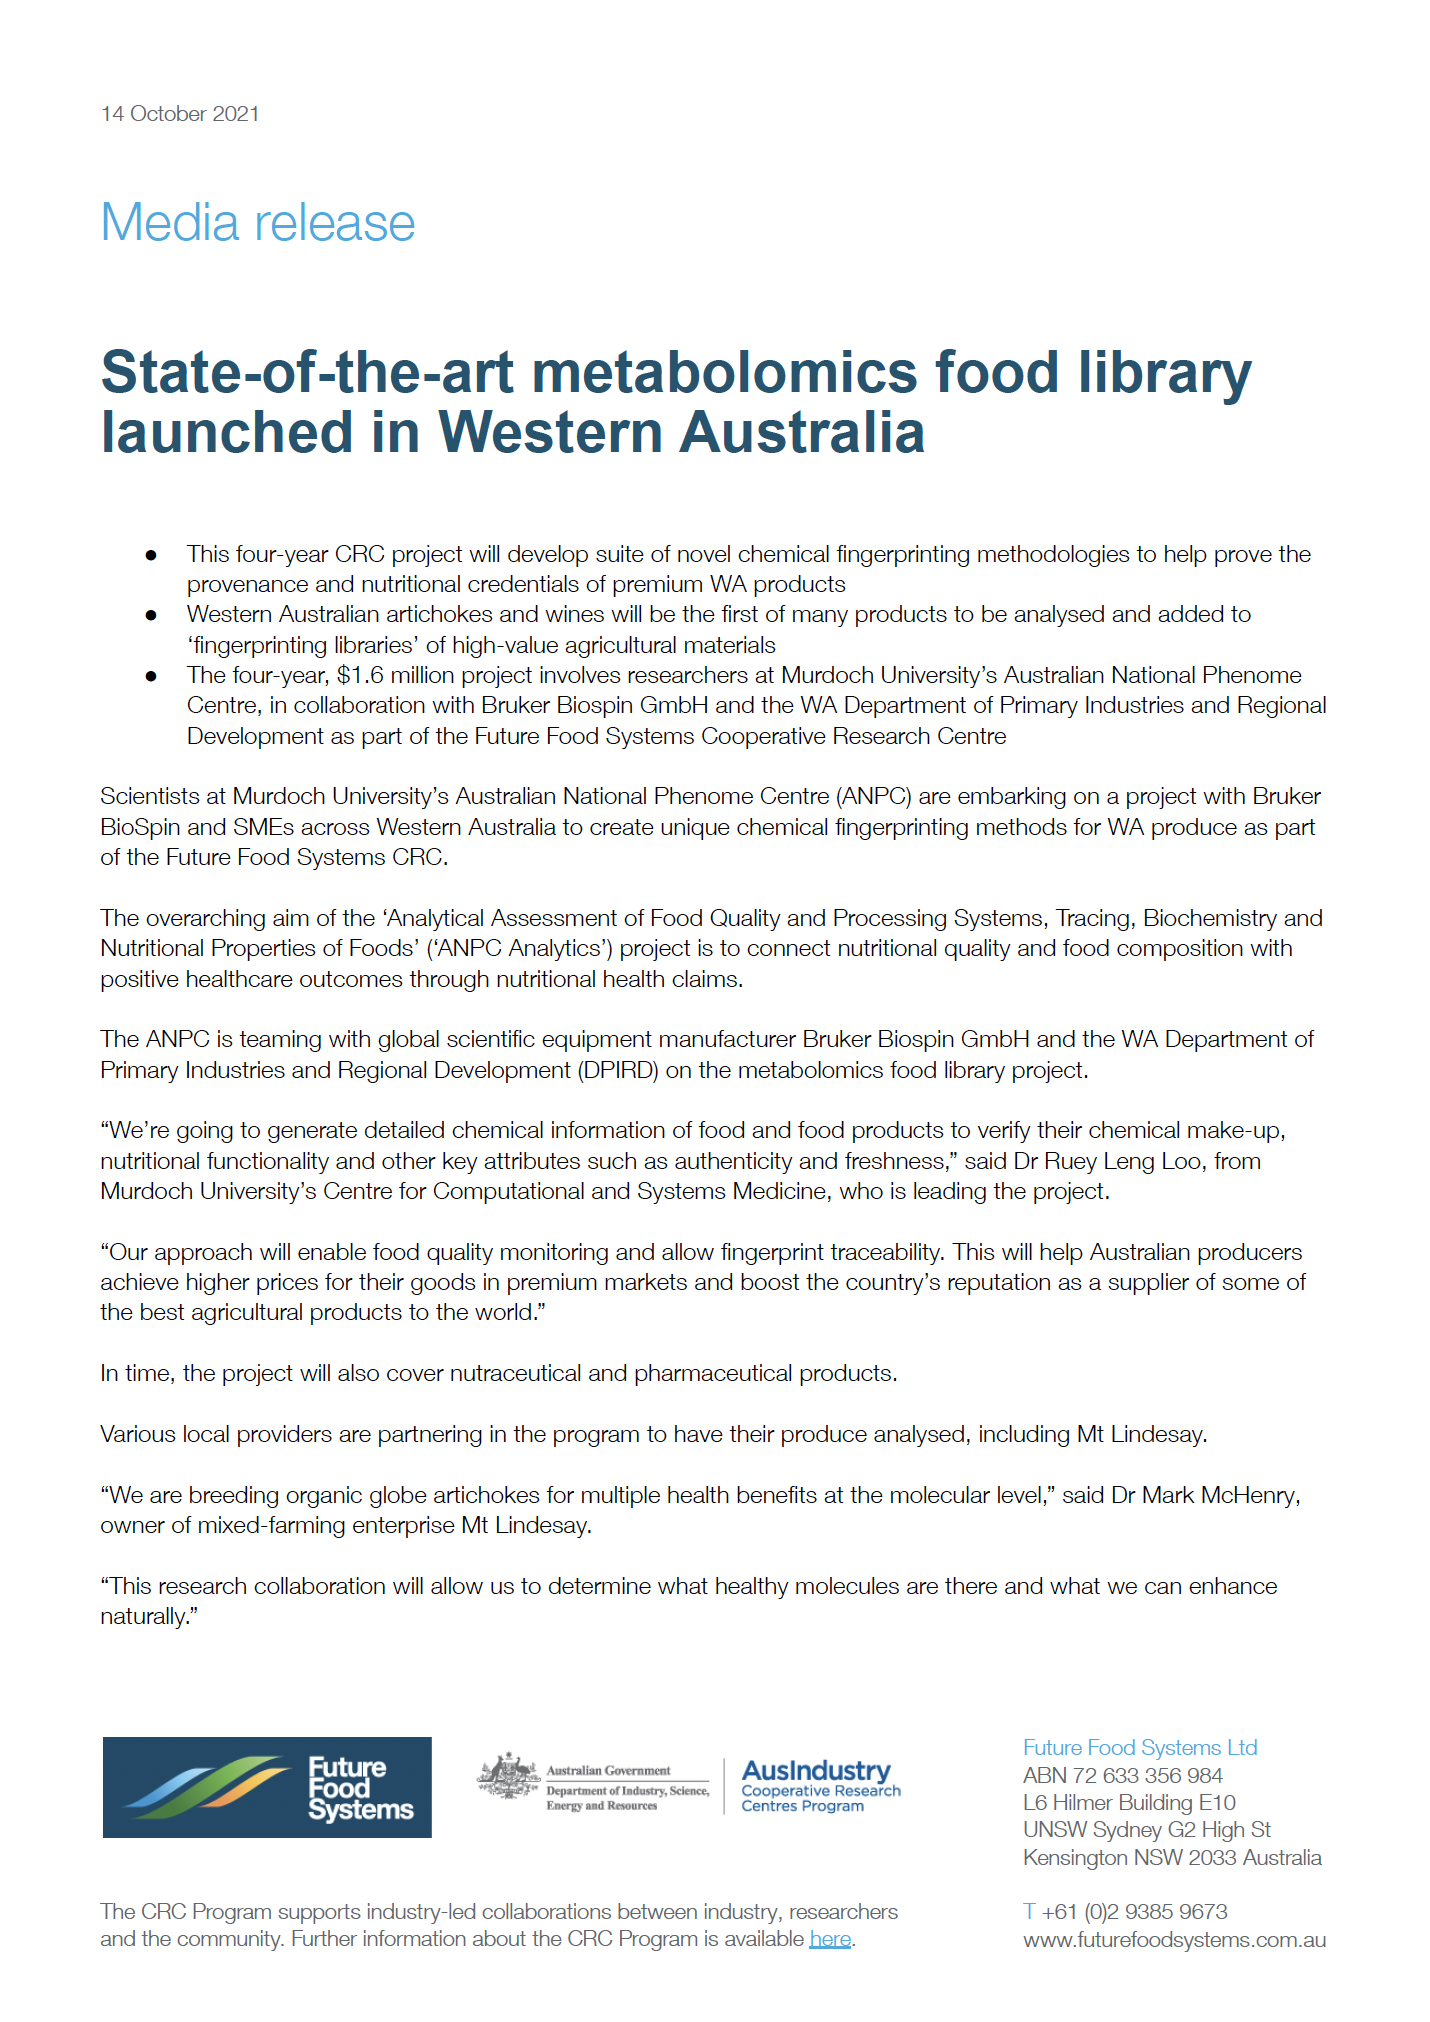 State-of-the-art metabolomics food library launched in Western ...